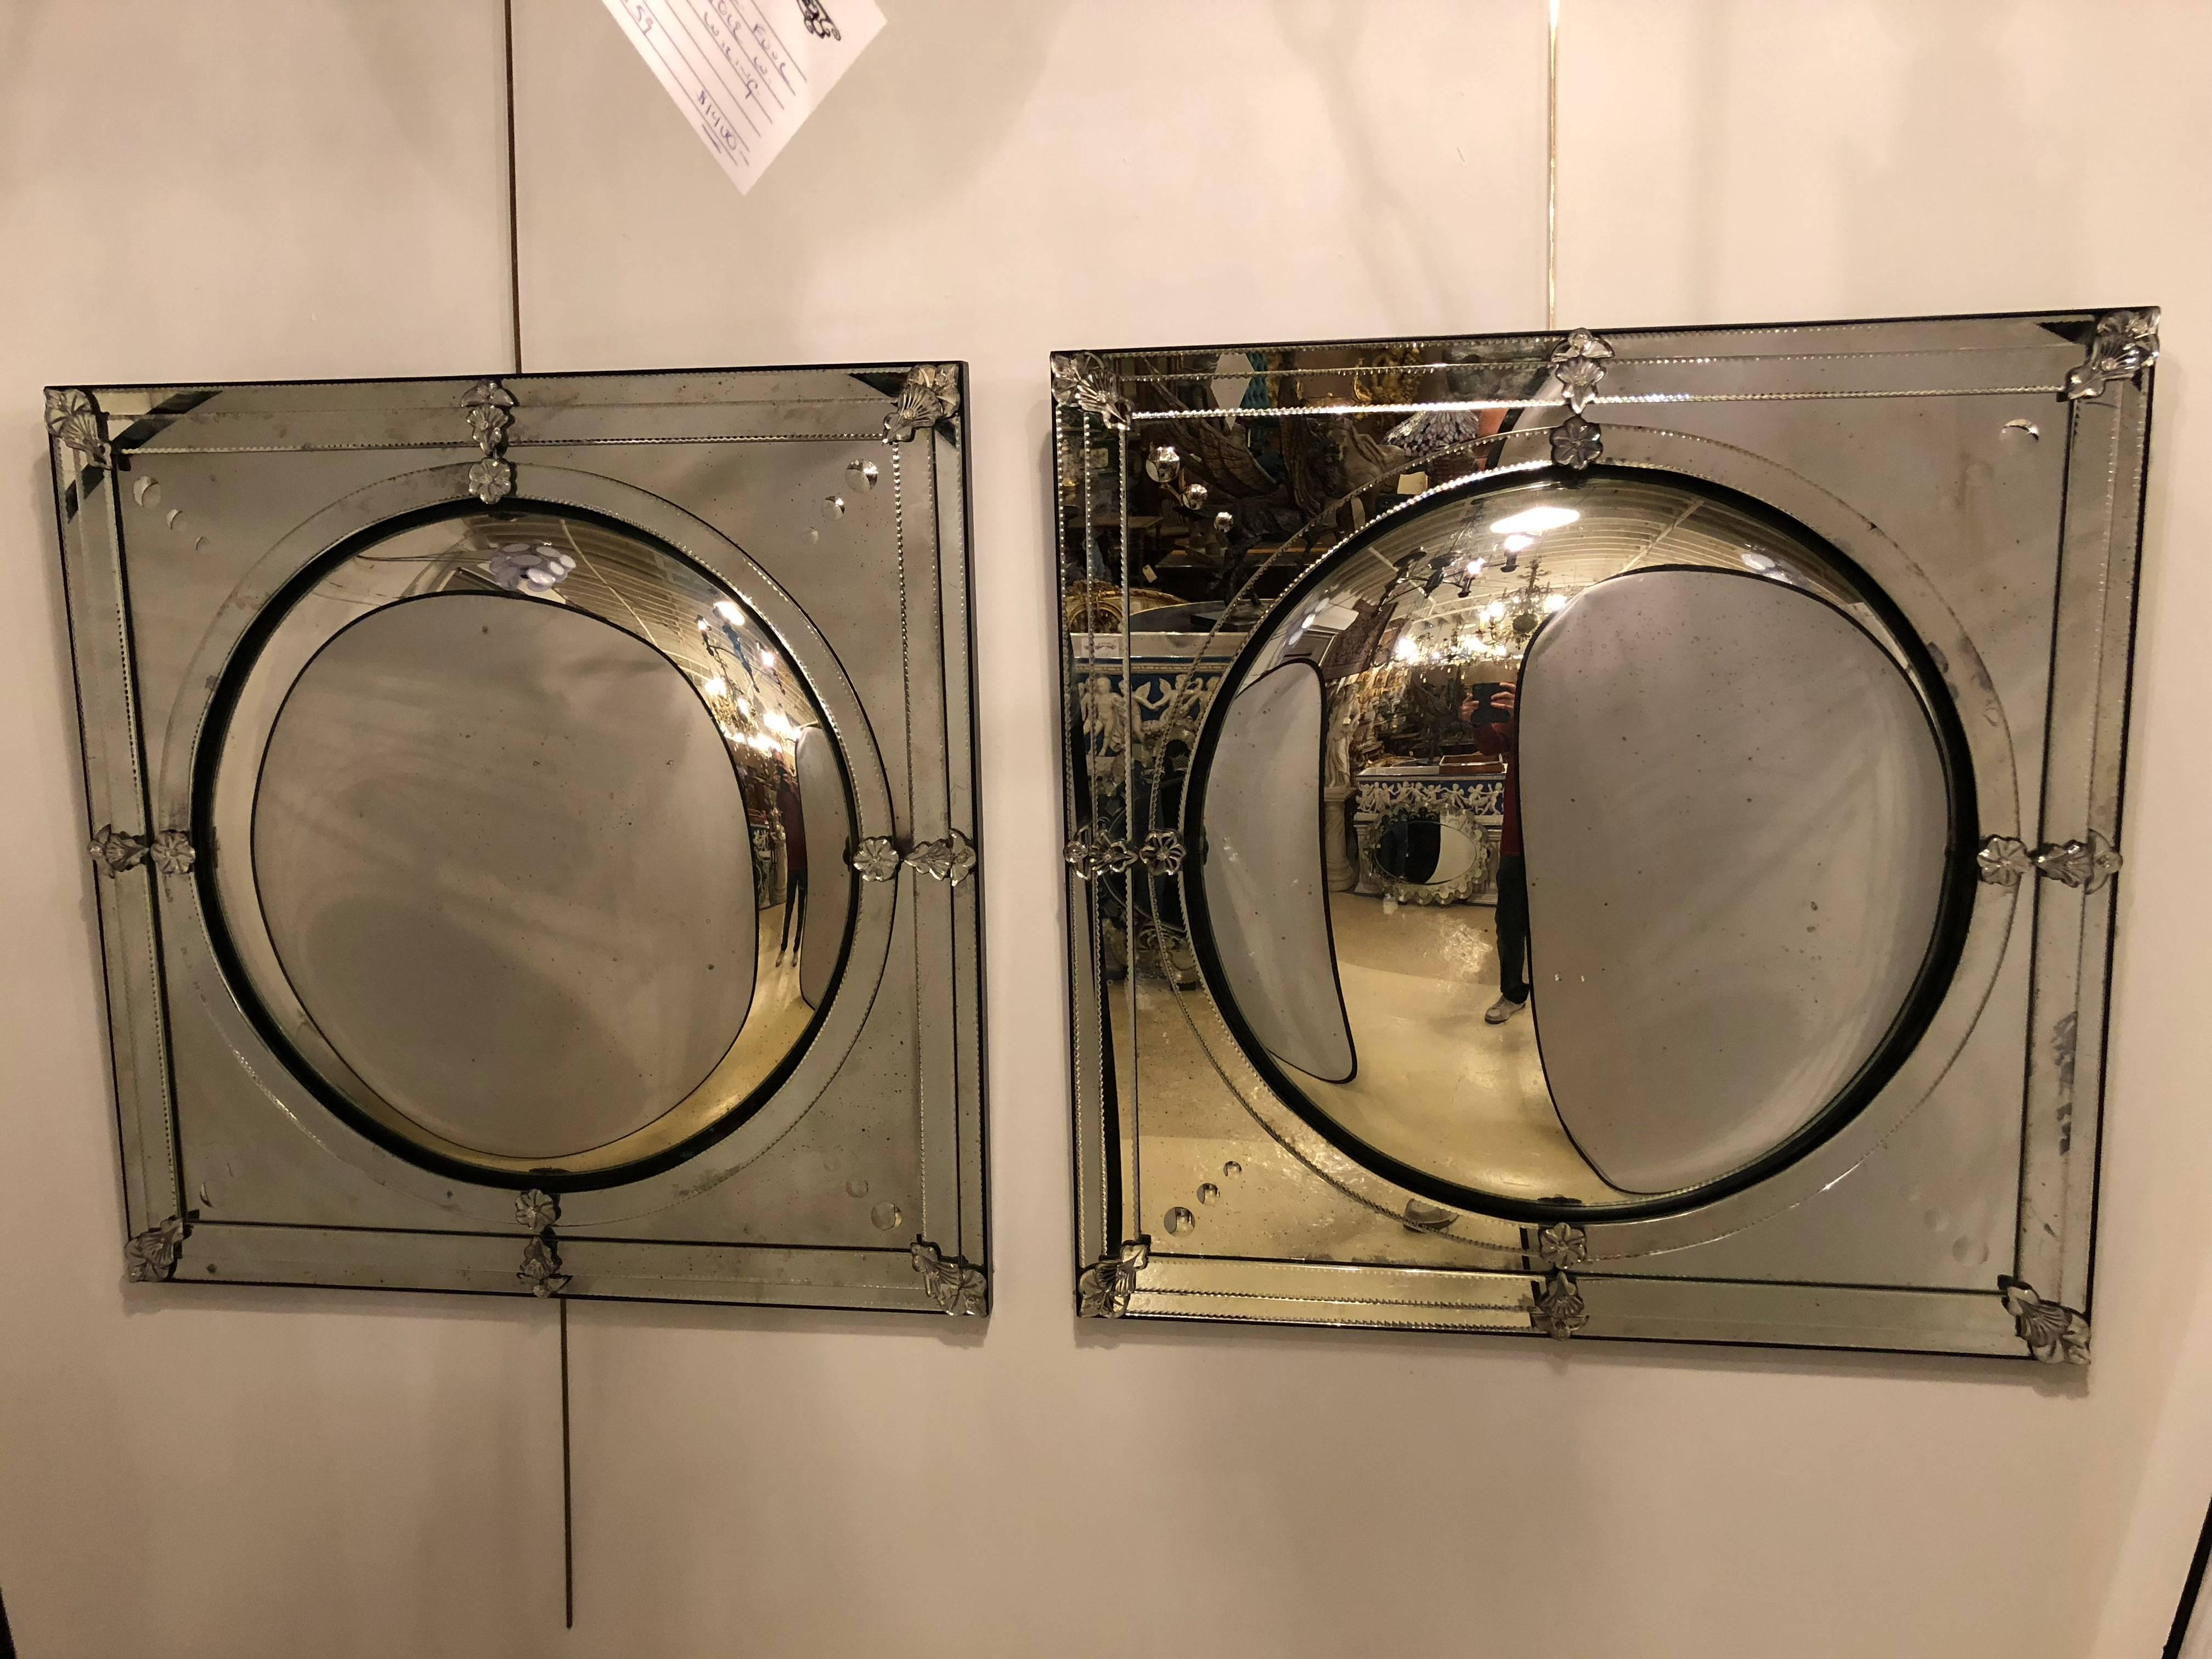 A Pair Of Modern Convex Center Square Framed Wall or Console Mirrors. These Hollywood Regency or Art Deco Style Wall or Console Mirrors have flair and style that is certain to light up any room setting. The convex bubble center circle is framed in